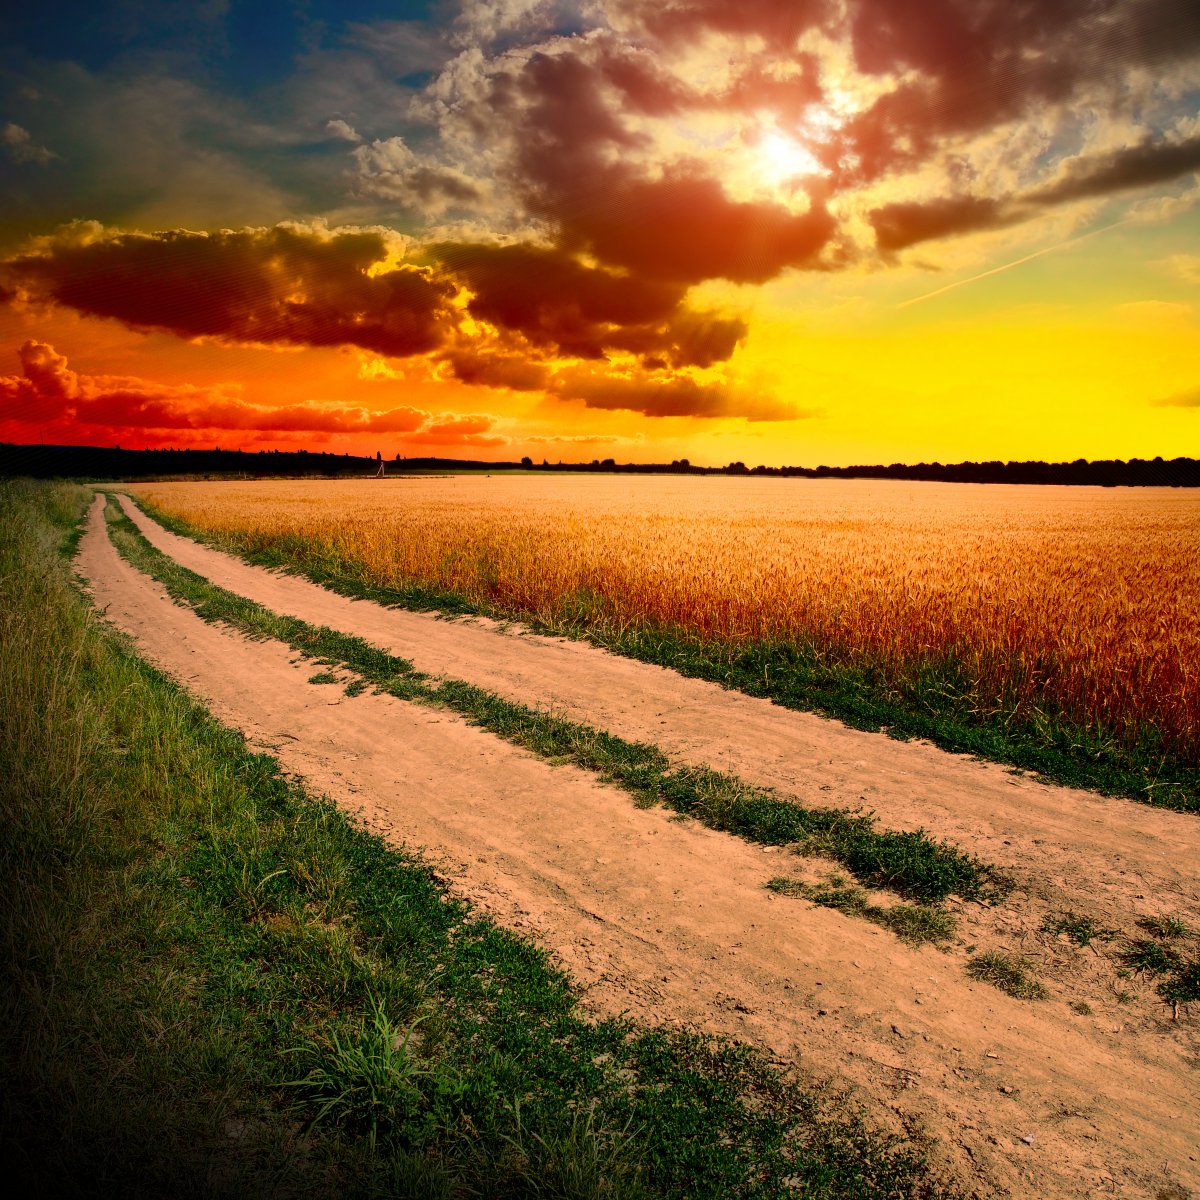 Beautiful scenery picture of wheat field road